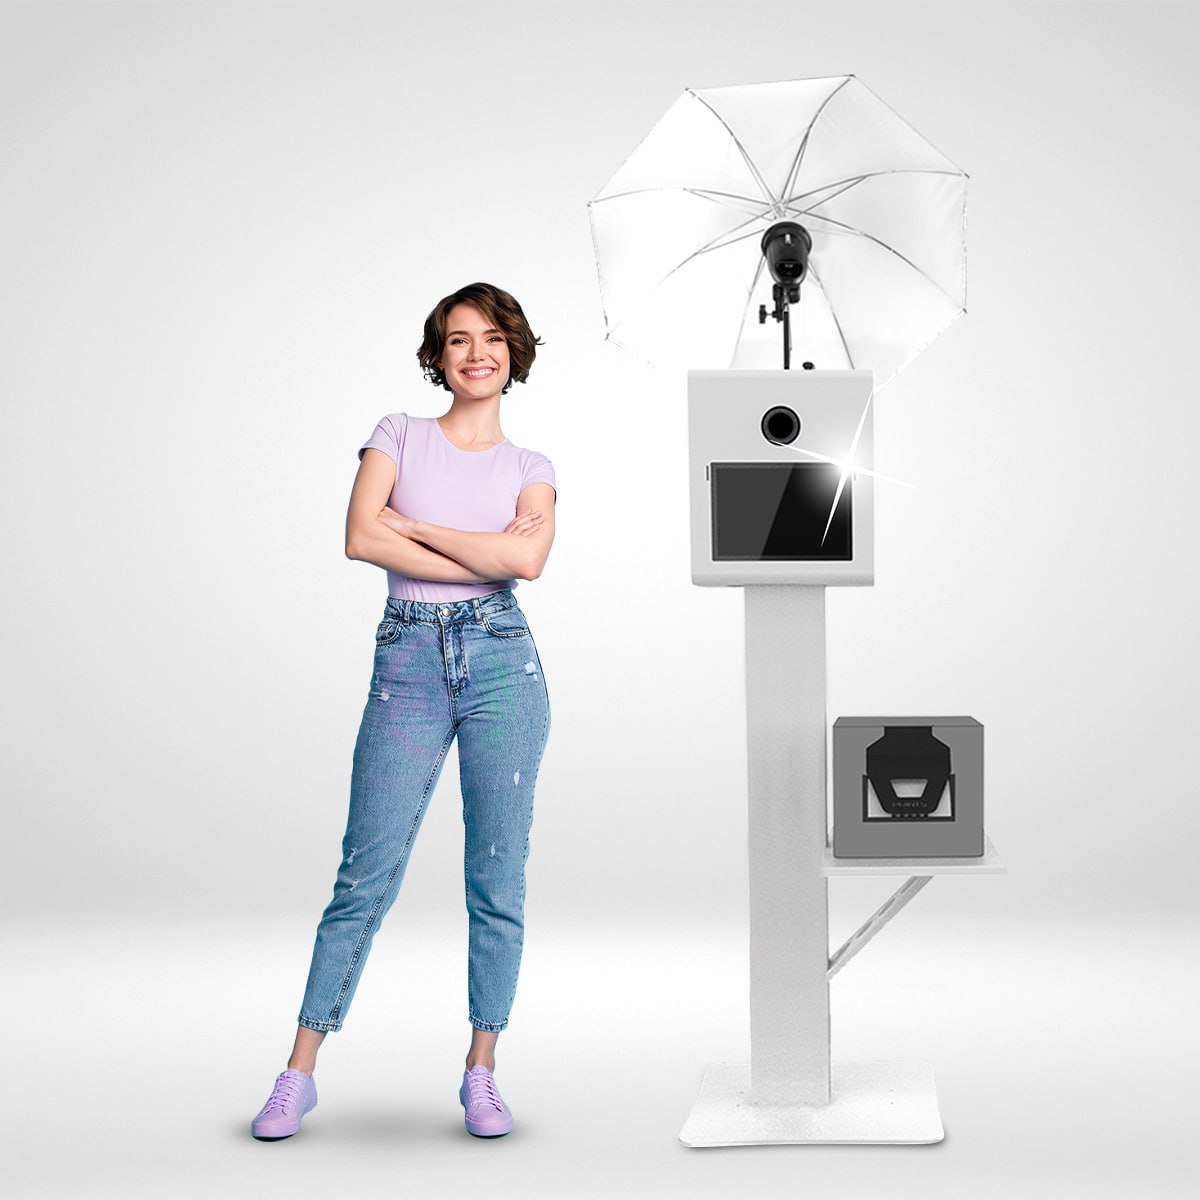 A woman standing next to a photo booth with a DSLR and strobe flash